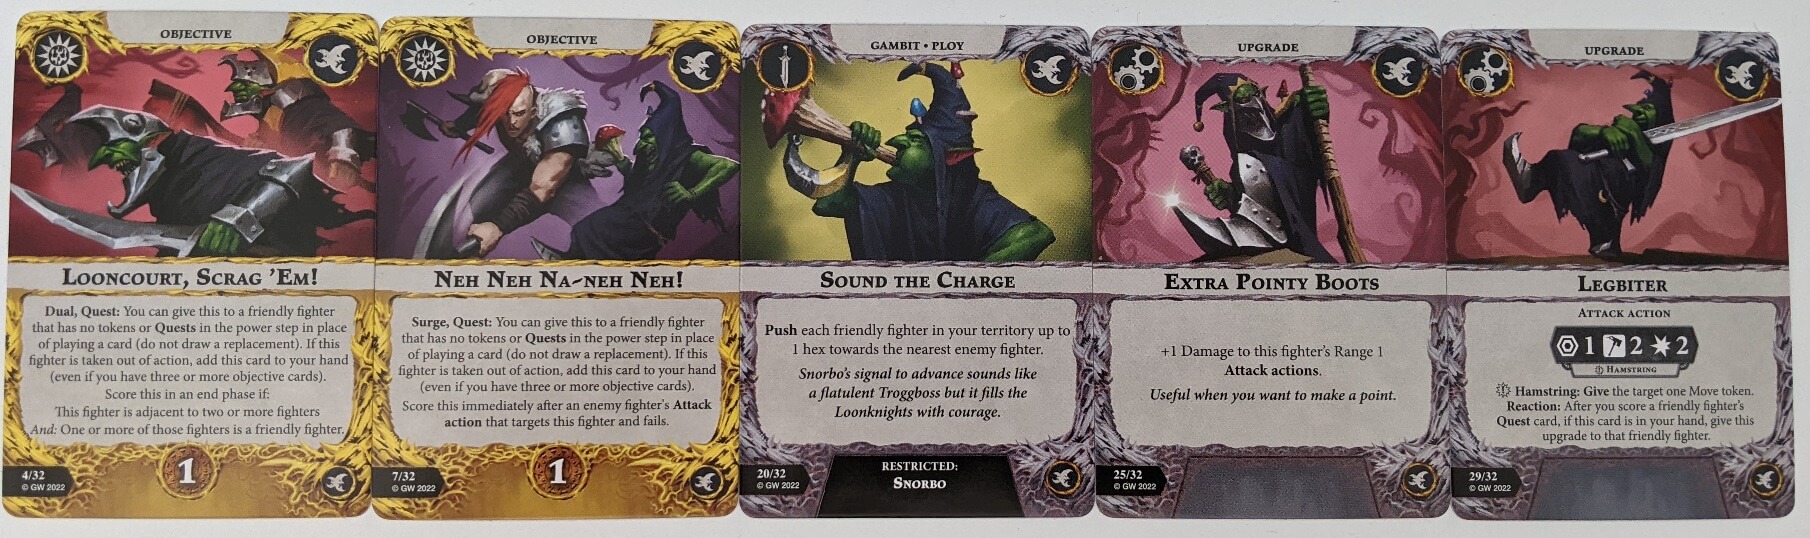 A selection of interesting cards from Grinkrak's Looncourt expansion